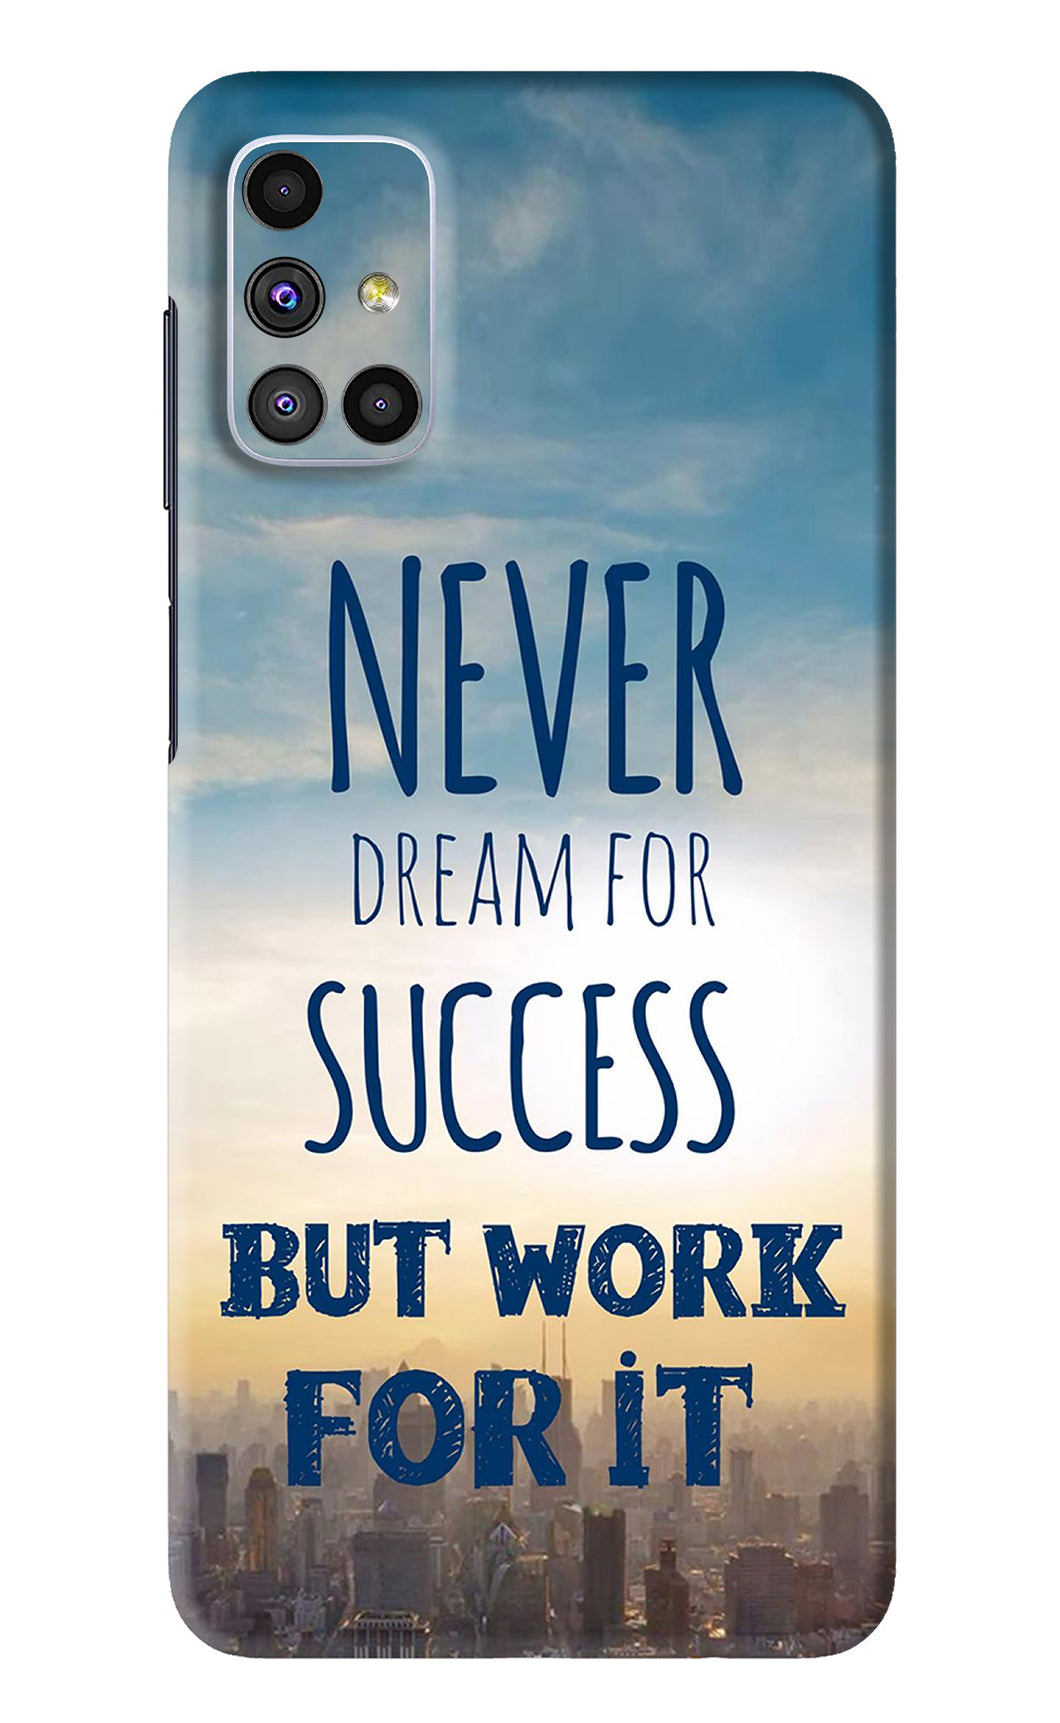 Never Dream For Success But Work For It Samsung Galaxy M51 Back Skin Wrap